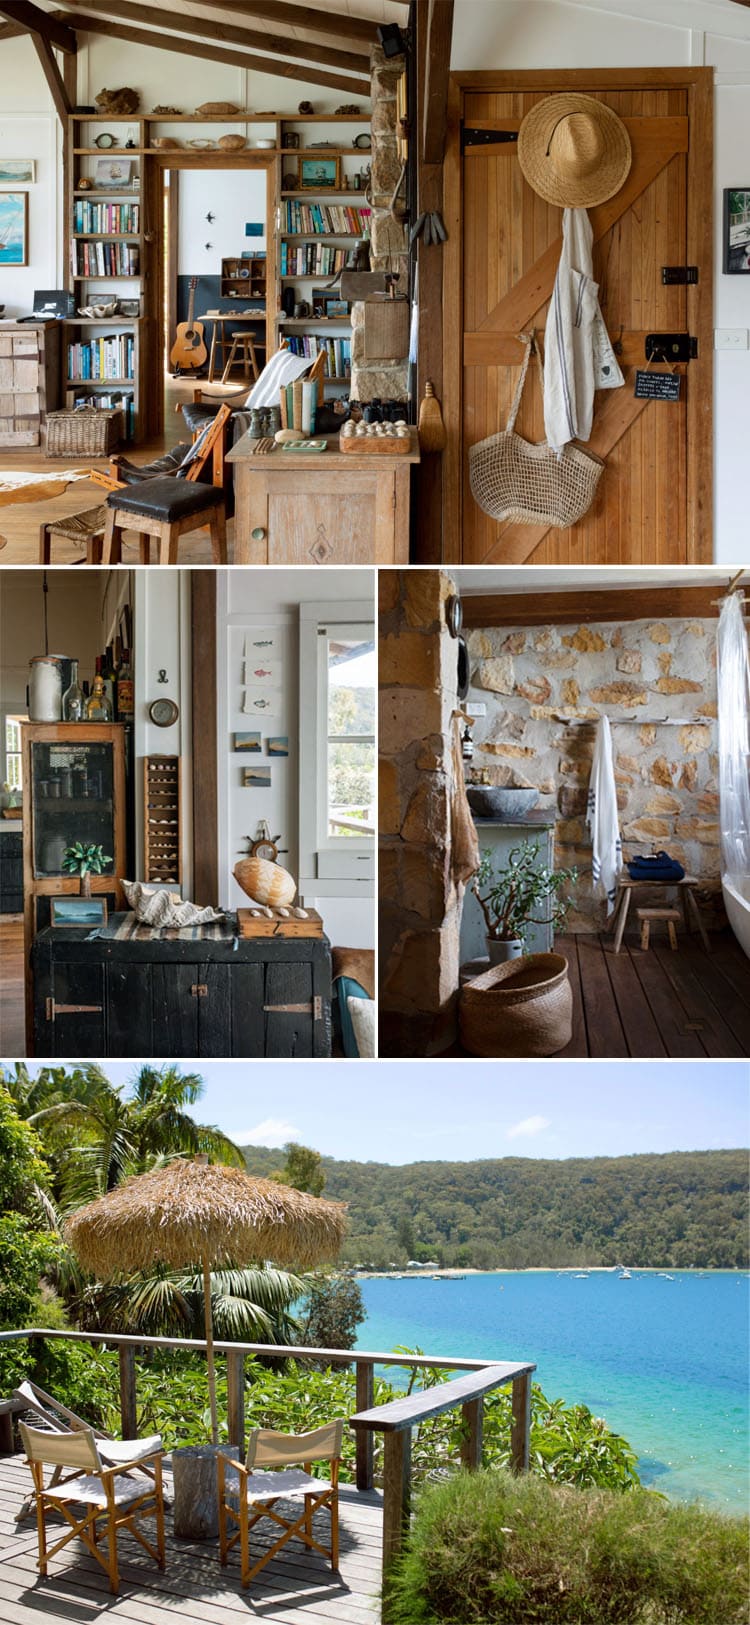 The Most Beautiful and Epic Airbnbs Worth Traveling For in 2019 | Mackerel Beach, Australia Airbnb | Epic Airbnb rentals | Most beautiful Airbnb rentals around the world | Coolest Airbnbs around the globe | Unique Airbnbs | Best Airbnbs to rent in 2019 | Airbnb design | Airbnb tips | Airbnb Ideas